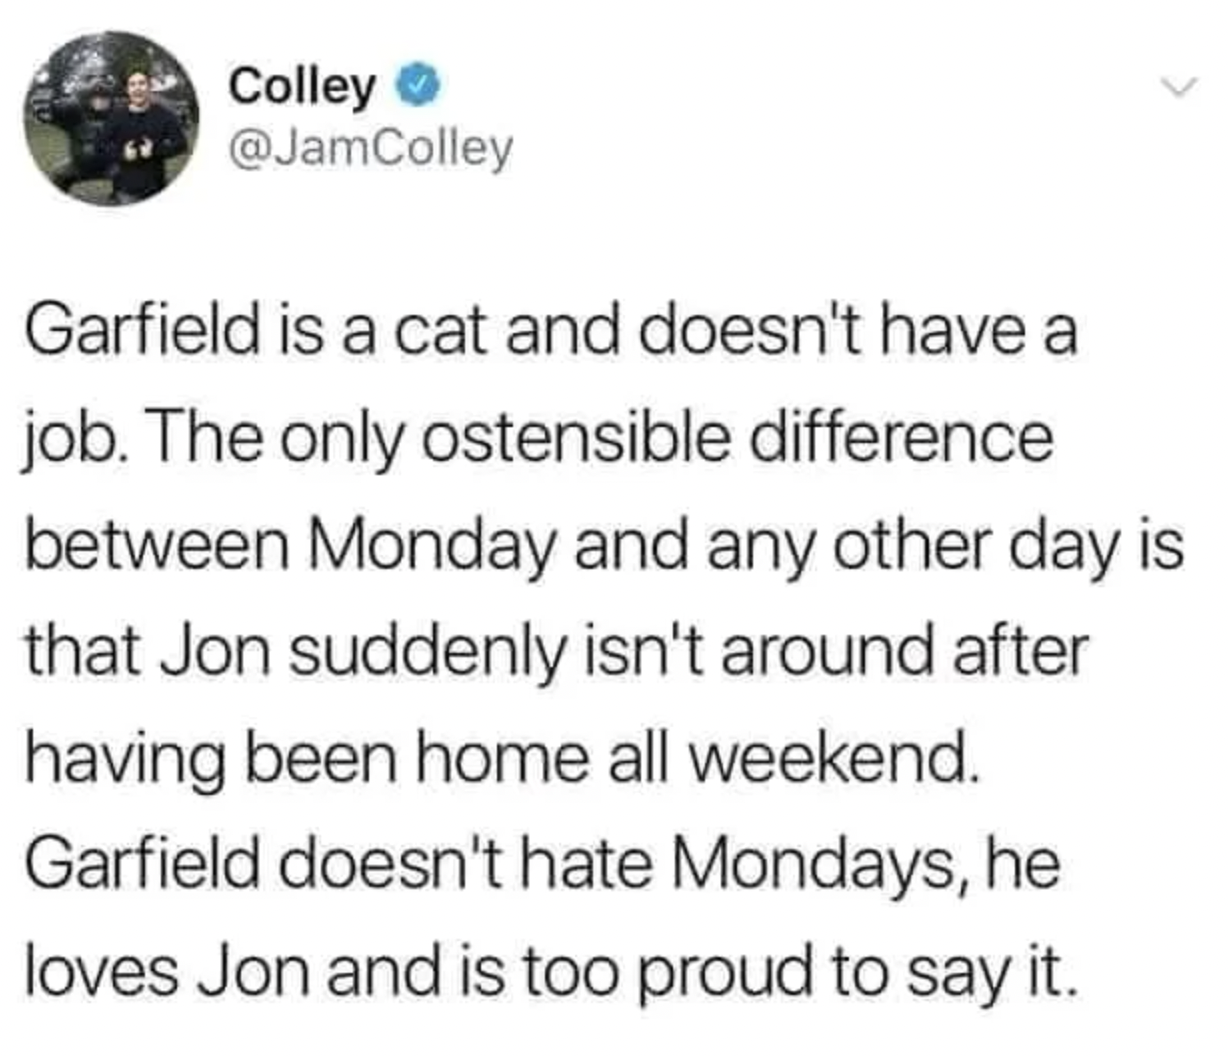 Pictures that techincally tell the truth - garfield doesn t hate mondays - Garfield is a cat and doesn't have a job. The only ostensible difference between Monday and any other day is that Jon suddenly isn't around after having been home all weekend. Garf